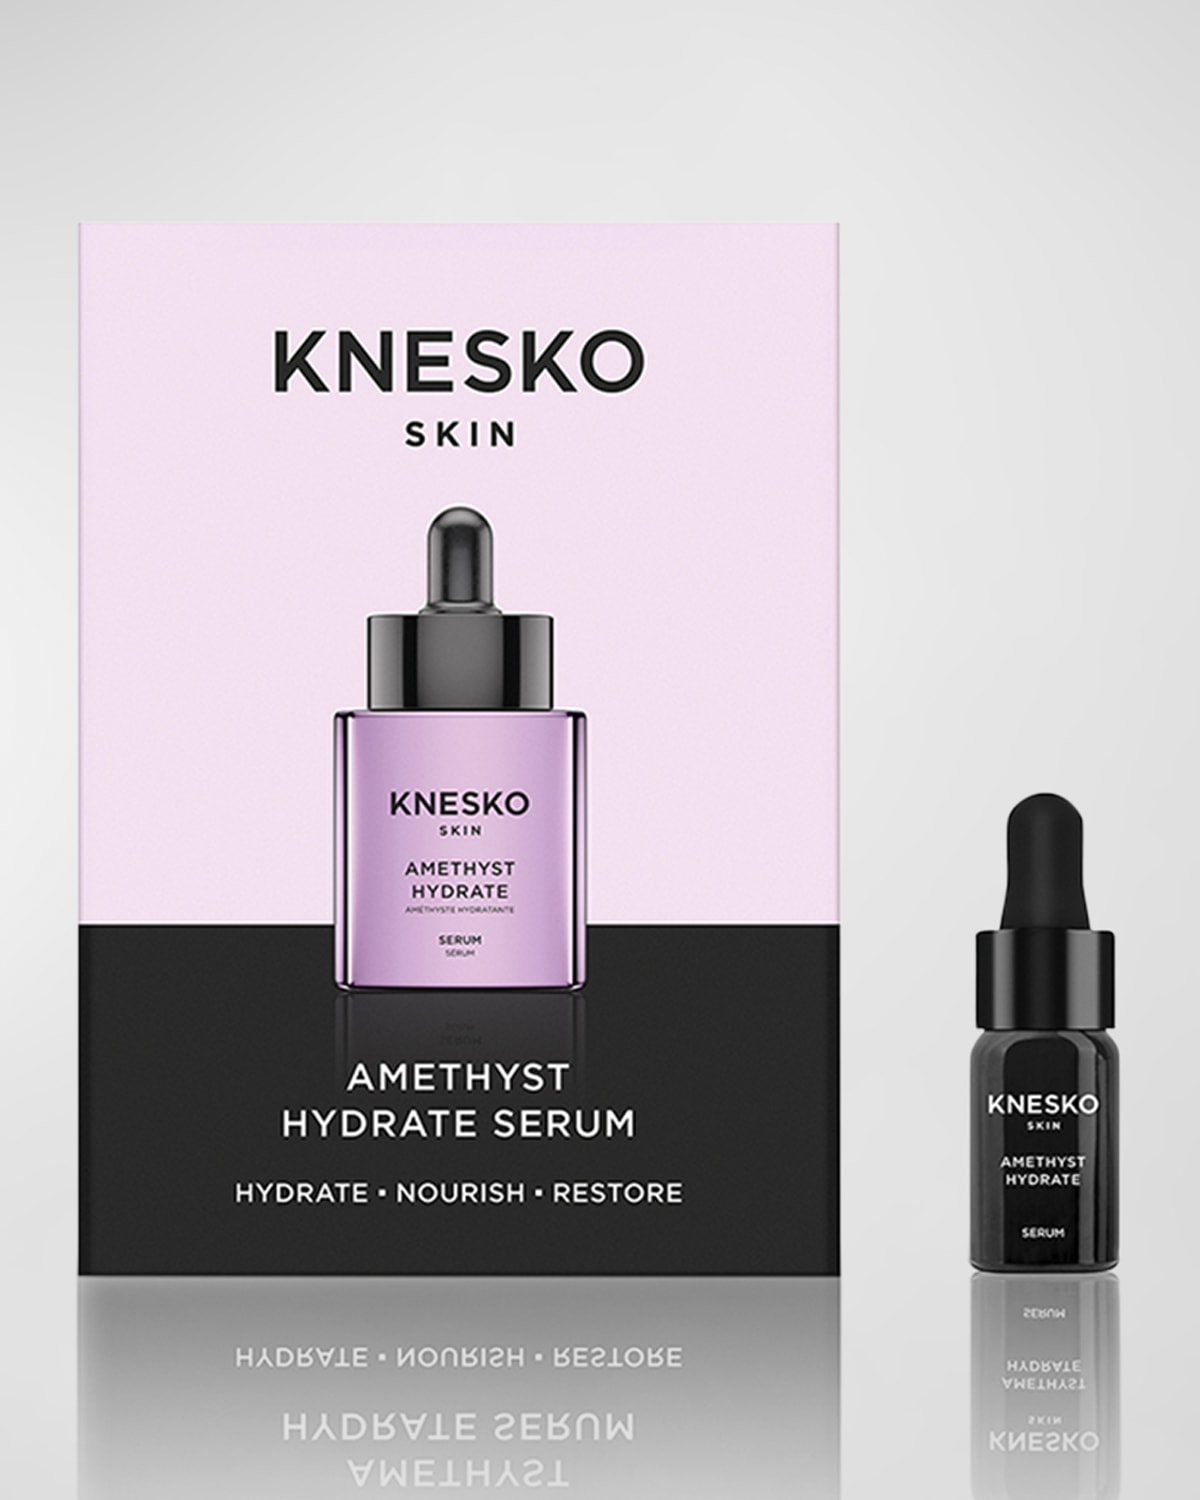 Amethyst Hydrate Serum, Yours with any $125 Knesko Skin Order